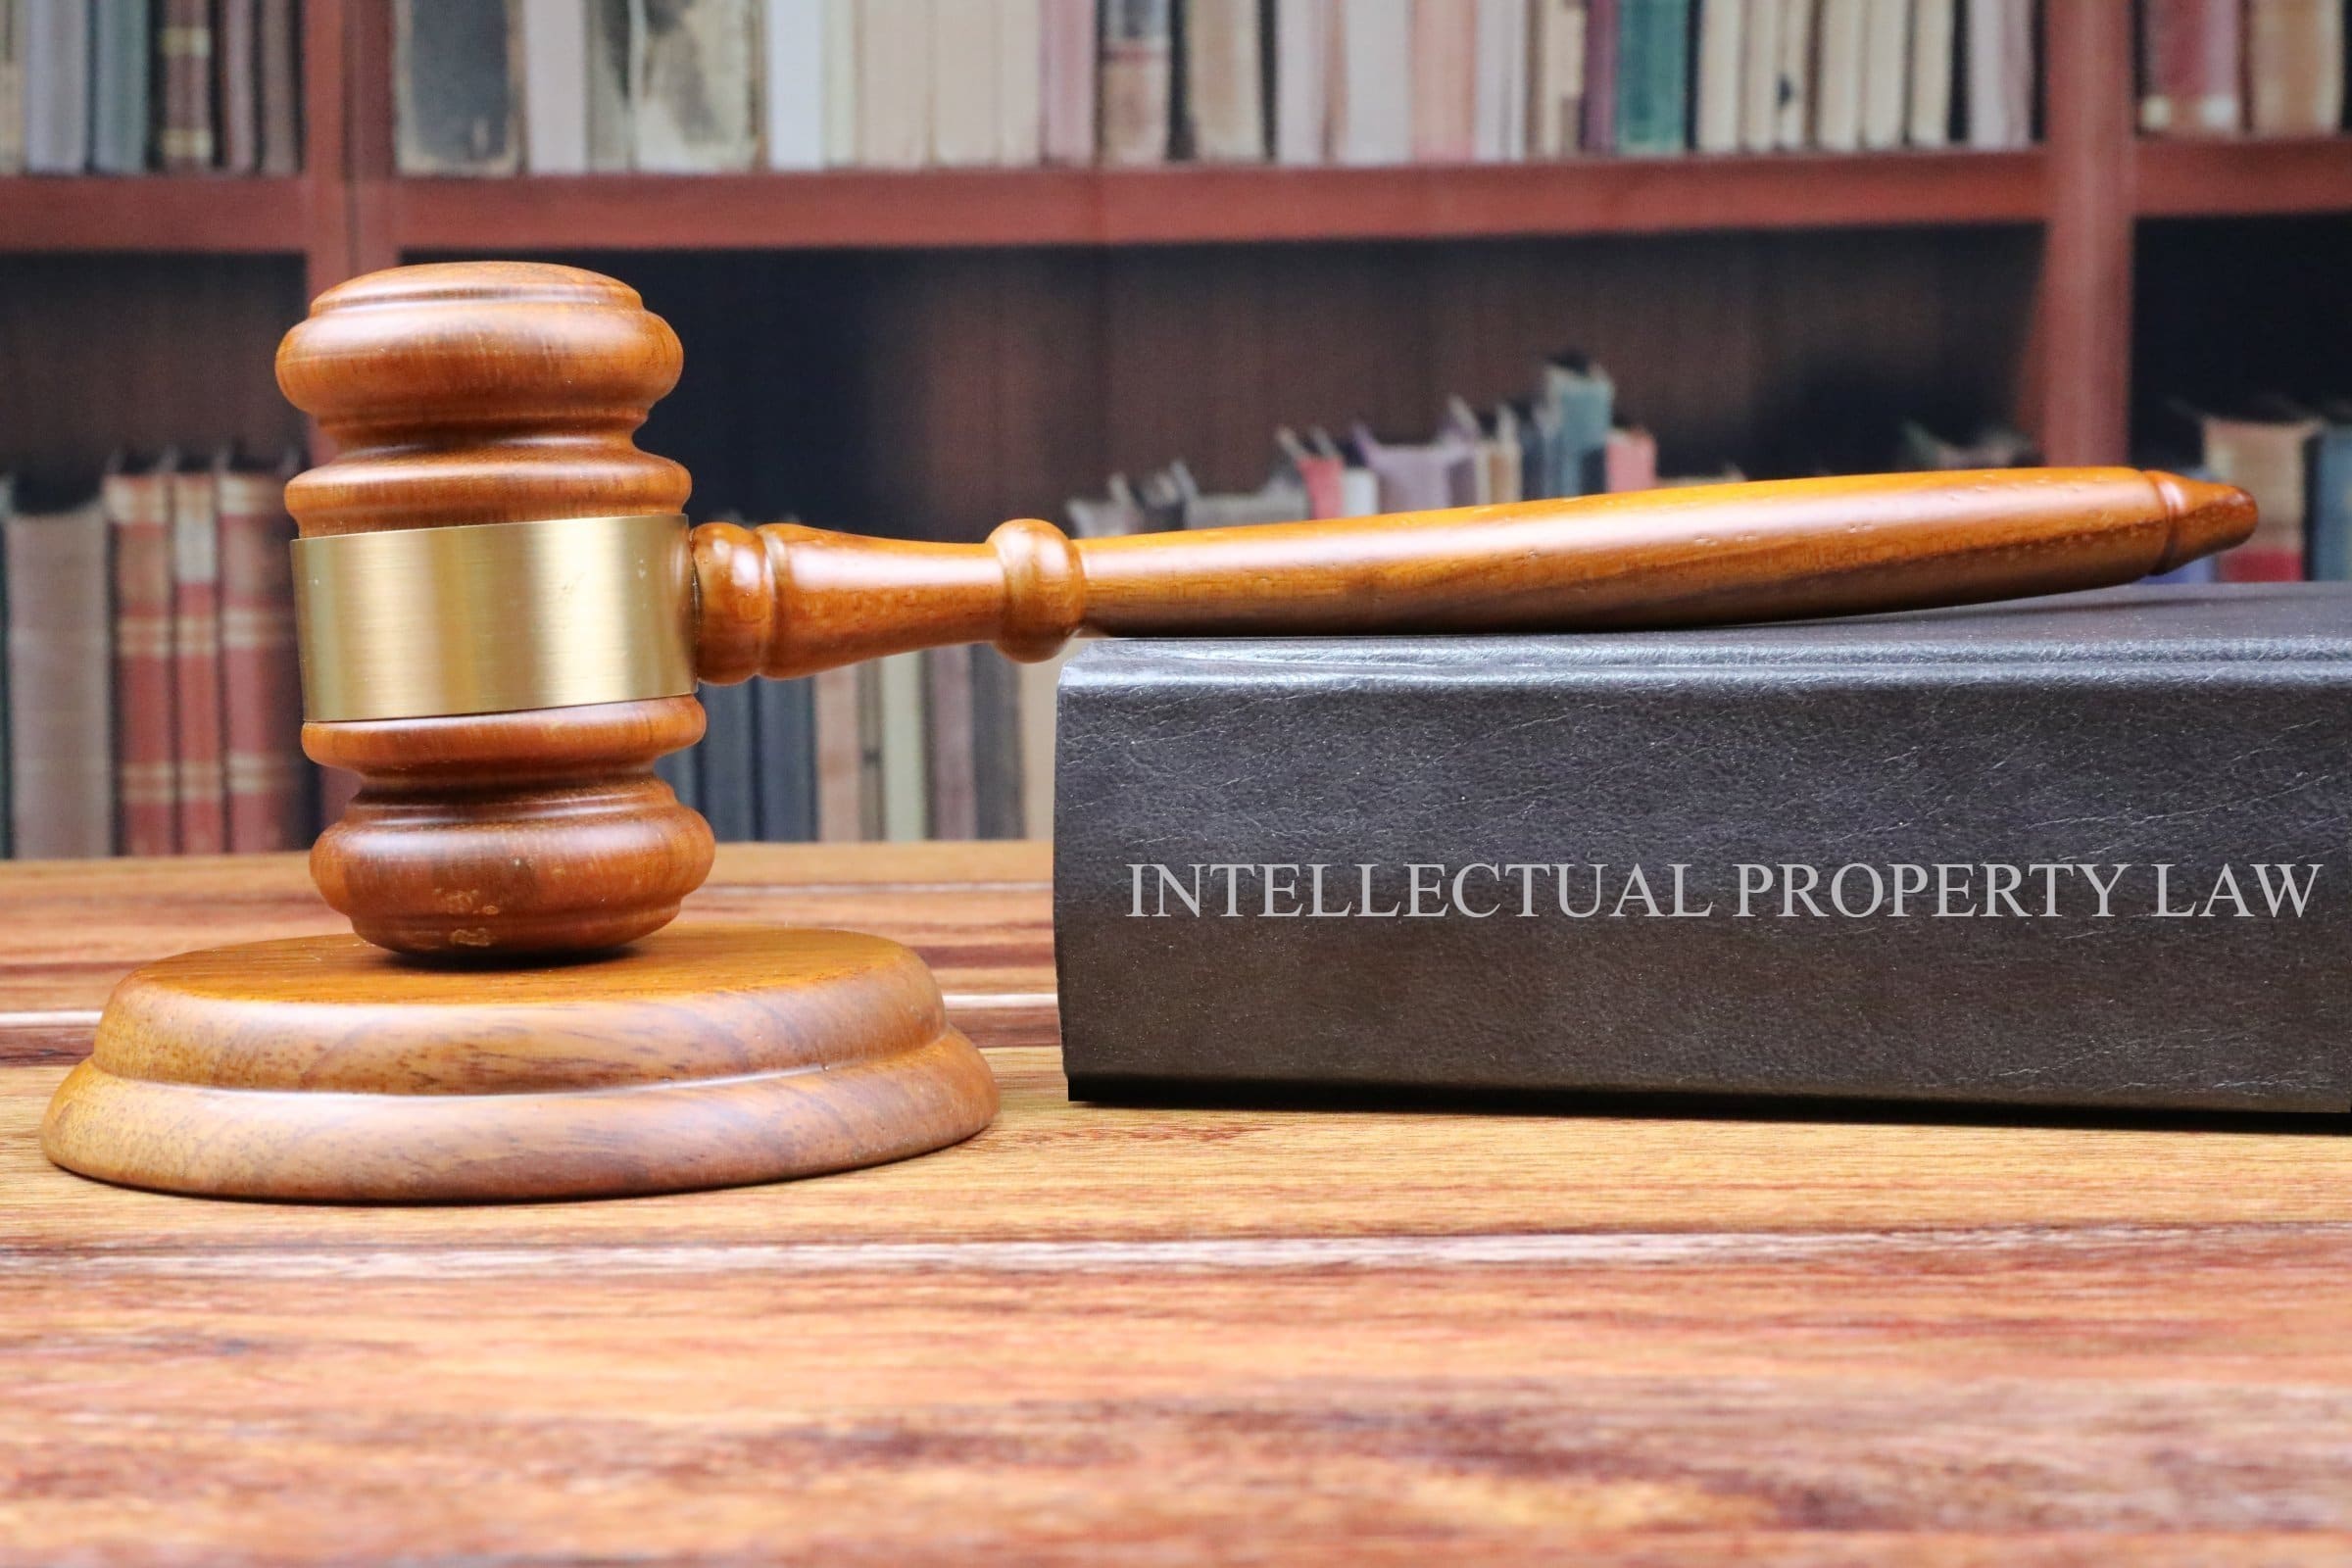 Image of a gavel and a book of intellectual property law